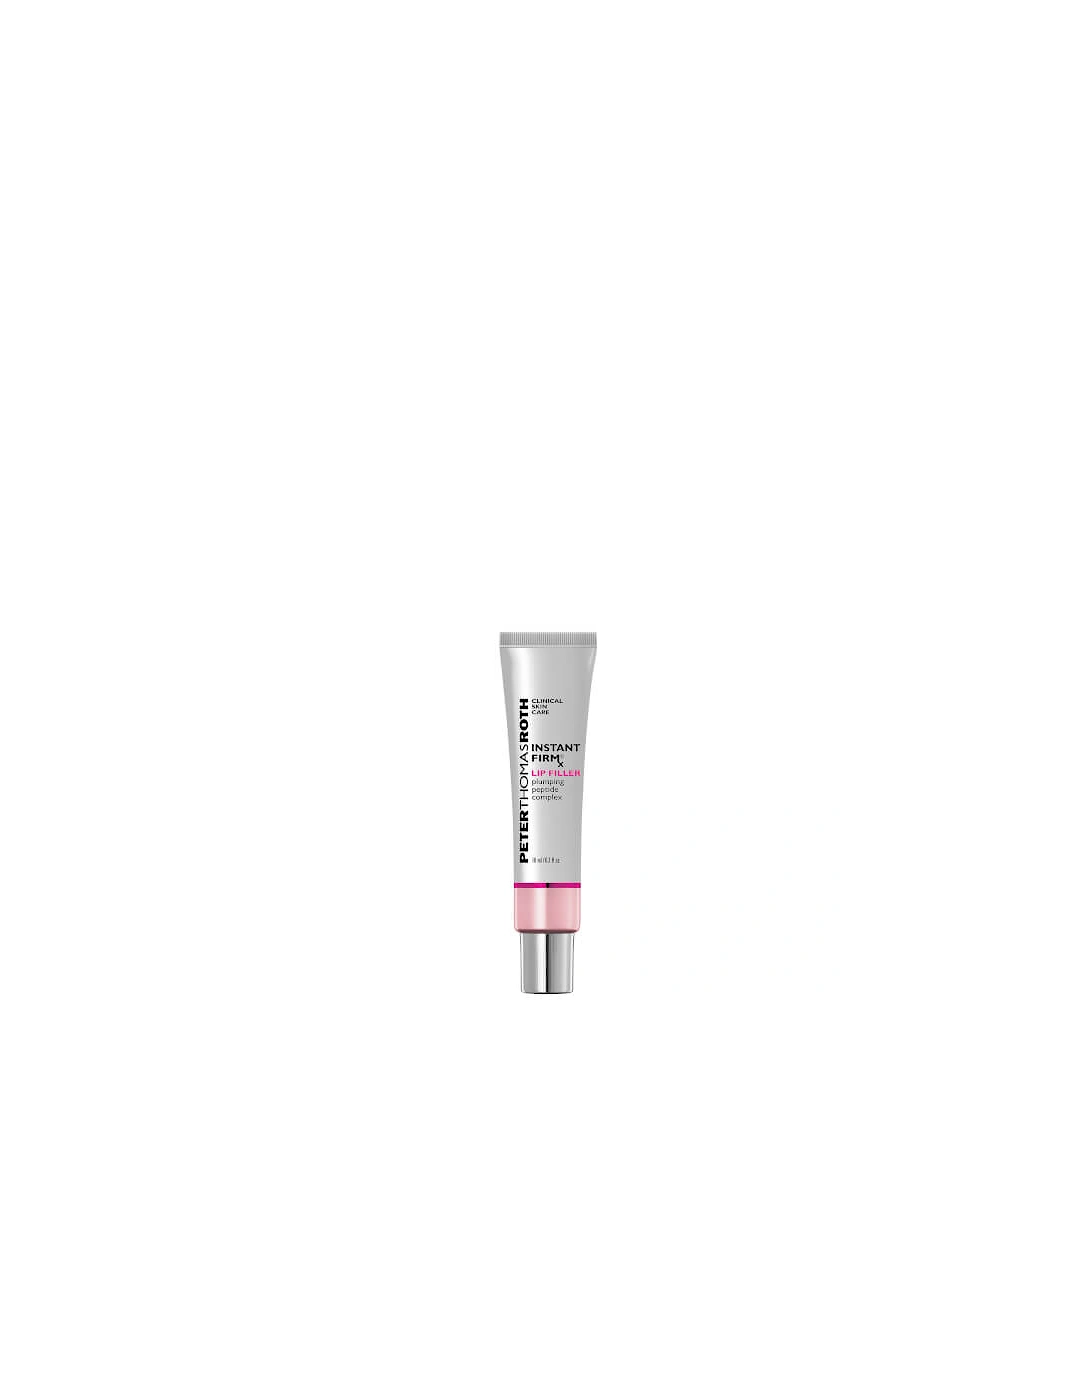 Exclusive Instant FIRMx Lip Treatment 30g, 2 of 1